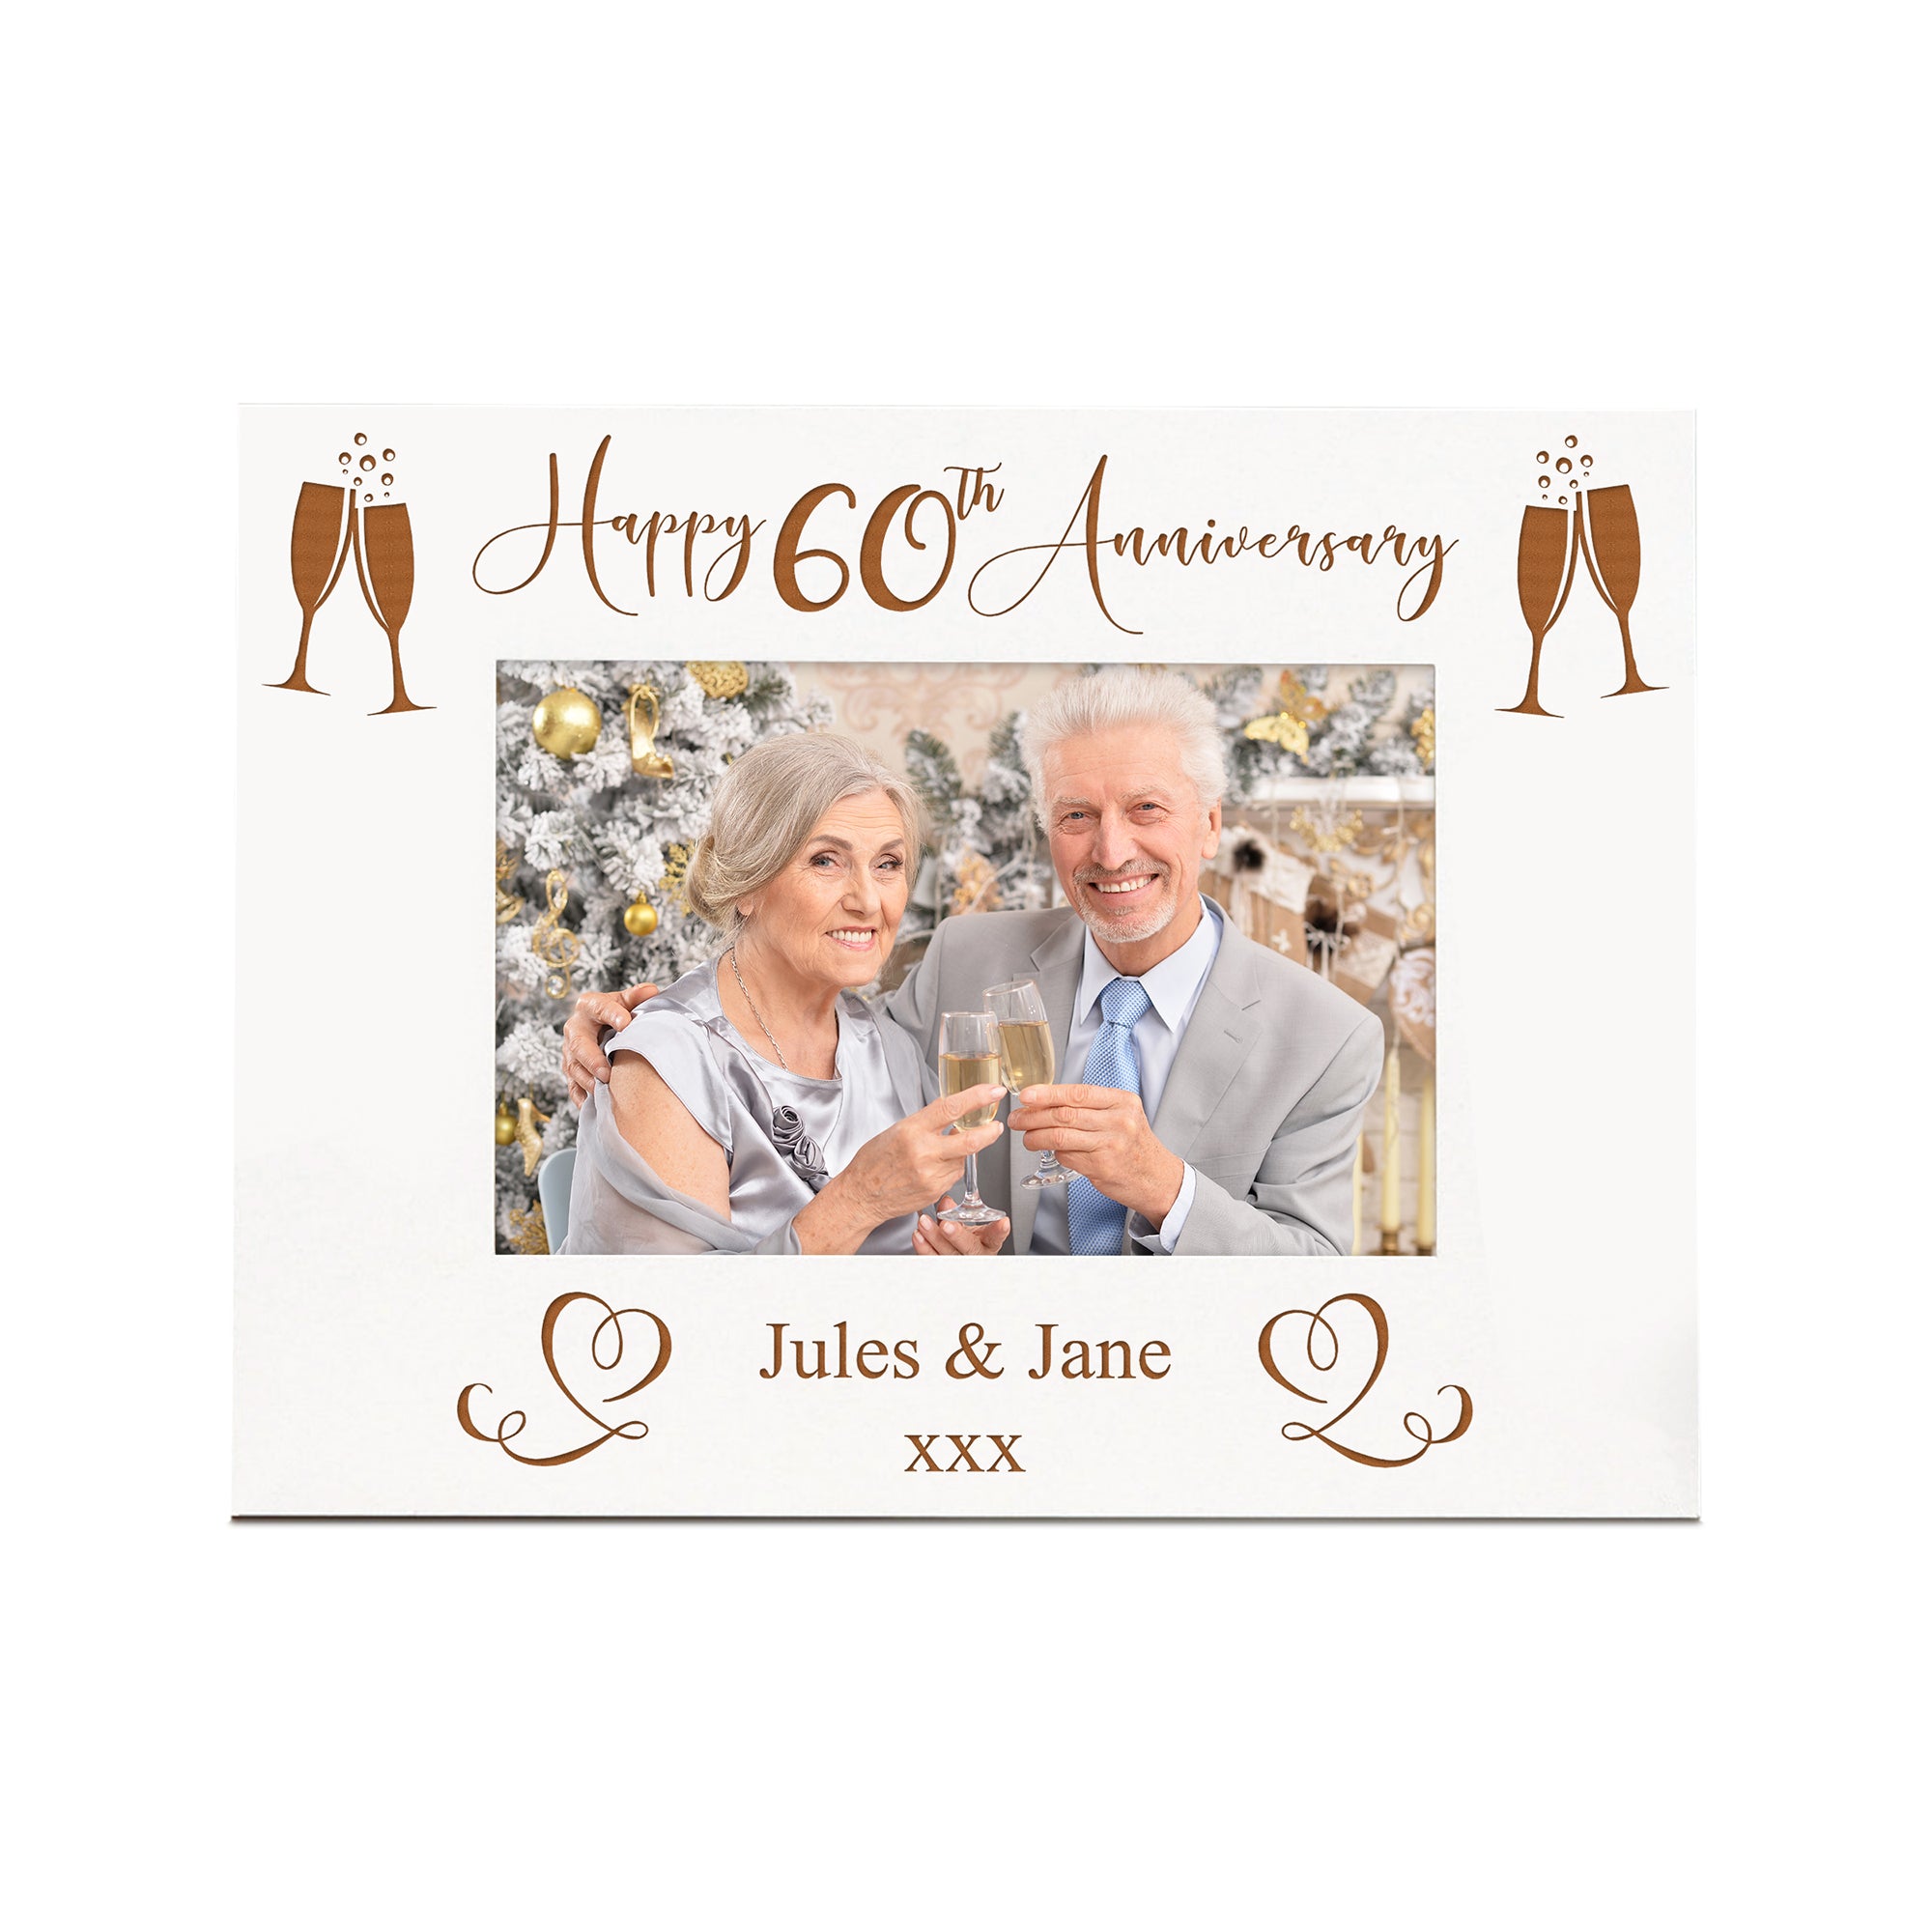 Personalised 60th Anniversary White Wooden Engraved Photo Frame Gift